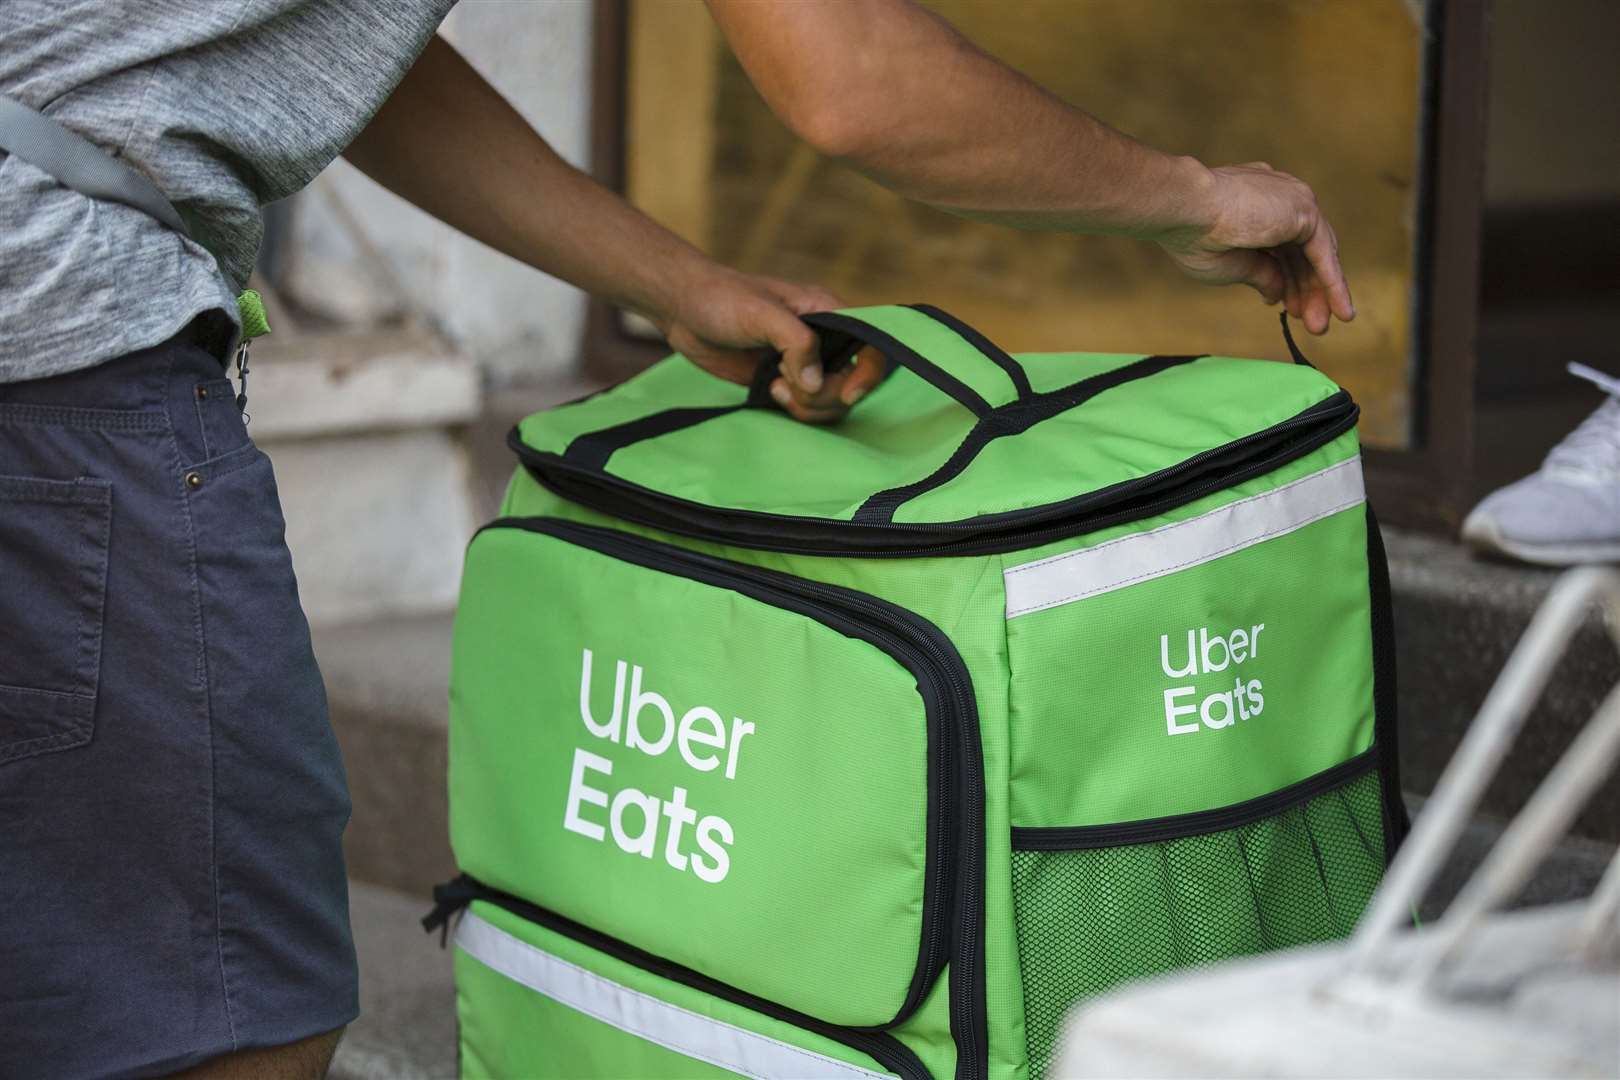 Uber Eats is allowed to deliver alcohol